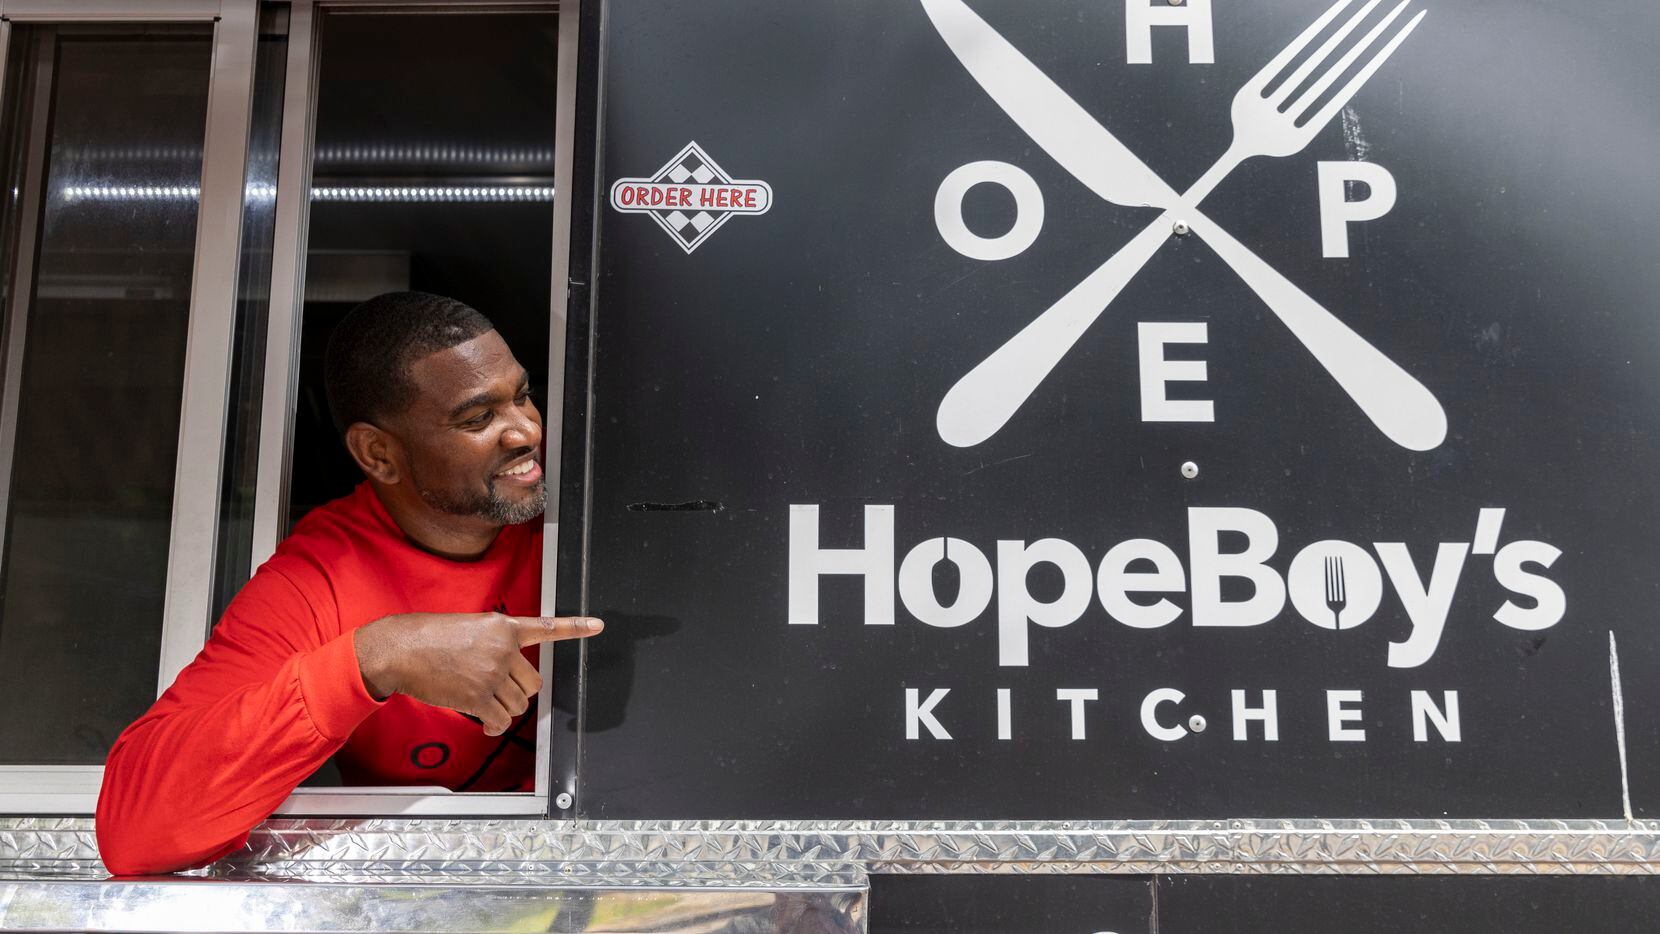 HopeBoy’s Kitchen owner Rico Alexander founded his vegan food truck in May 2020 as a way to...